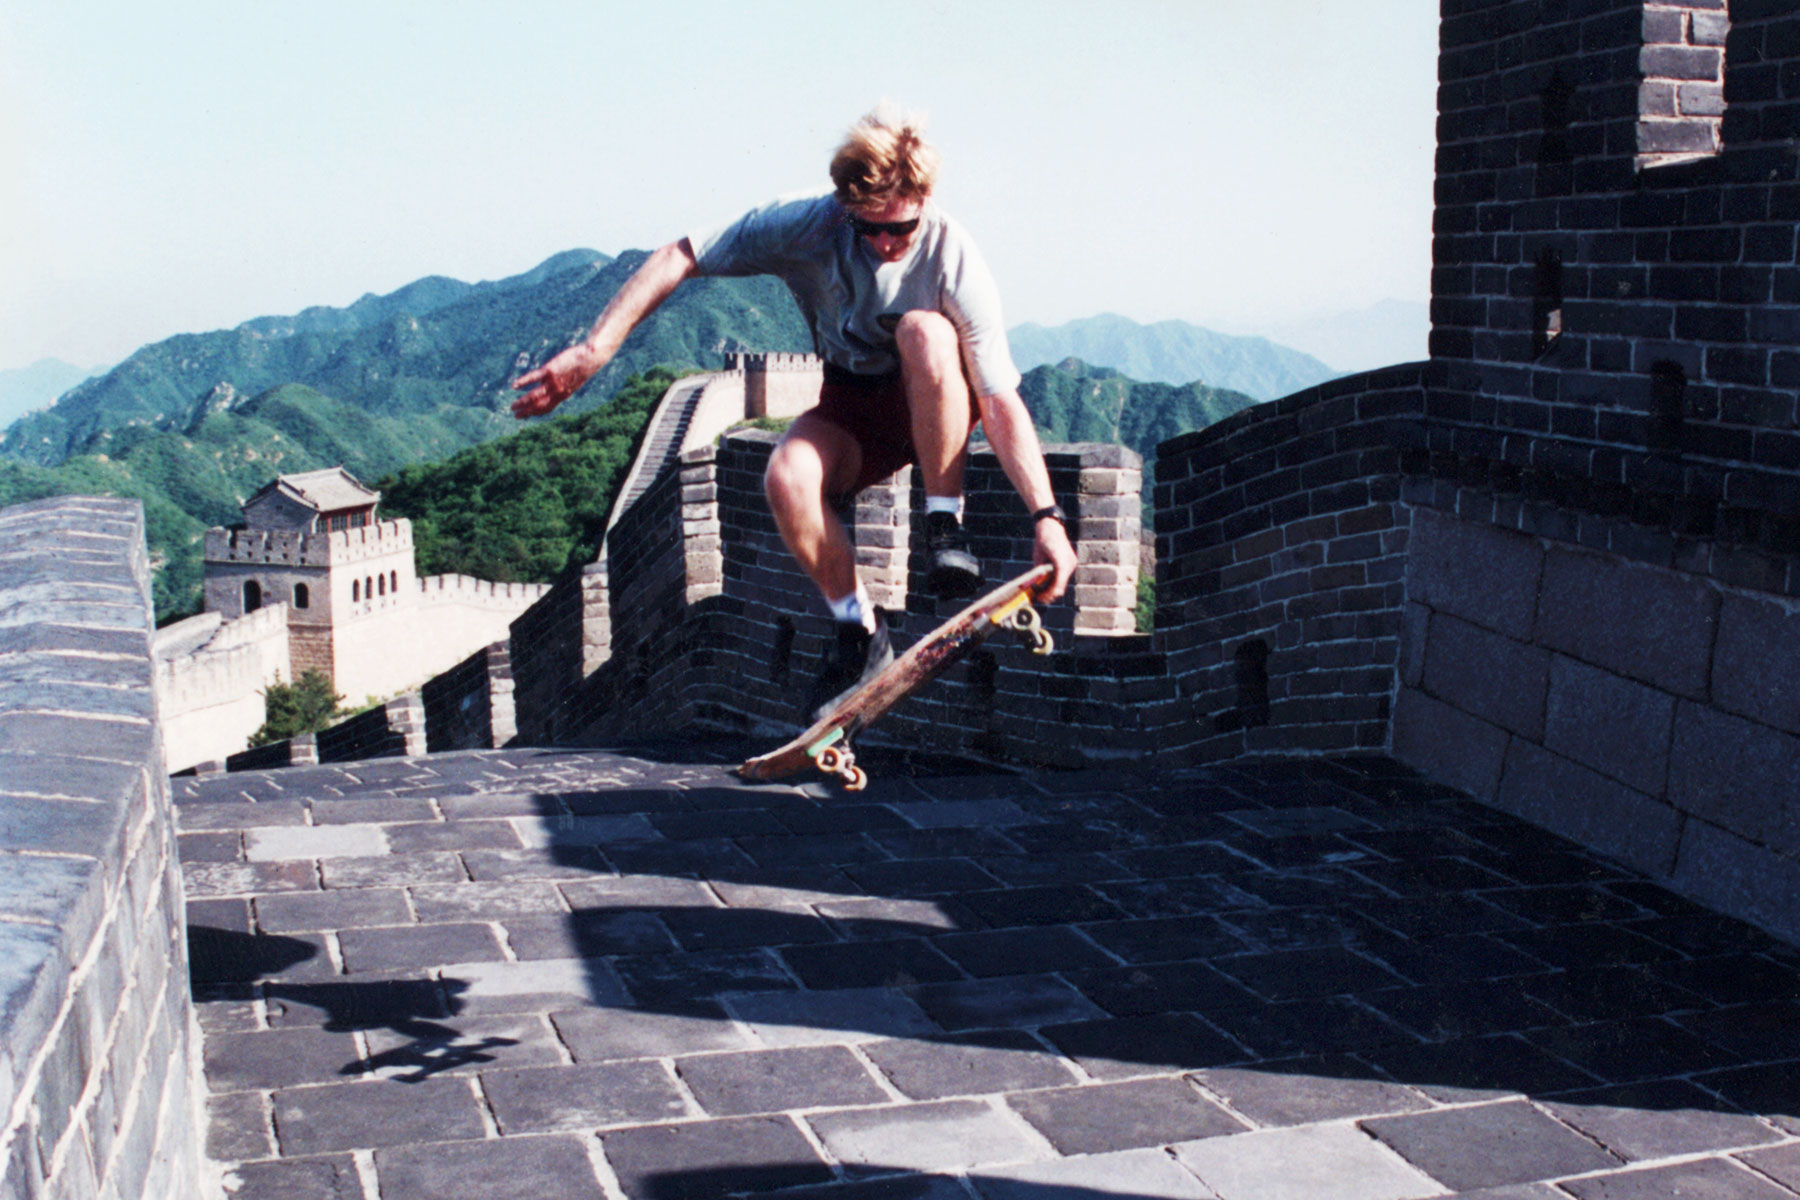 Skateboarding on the Great Wall of China | Surf Doctor Steven Andrew Martin | Skate the Wall | Peking University Study Abroad | Badaling Great Wall 八达岭 万里长城